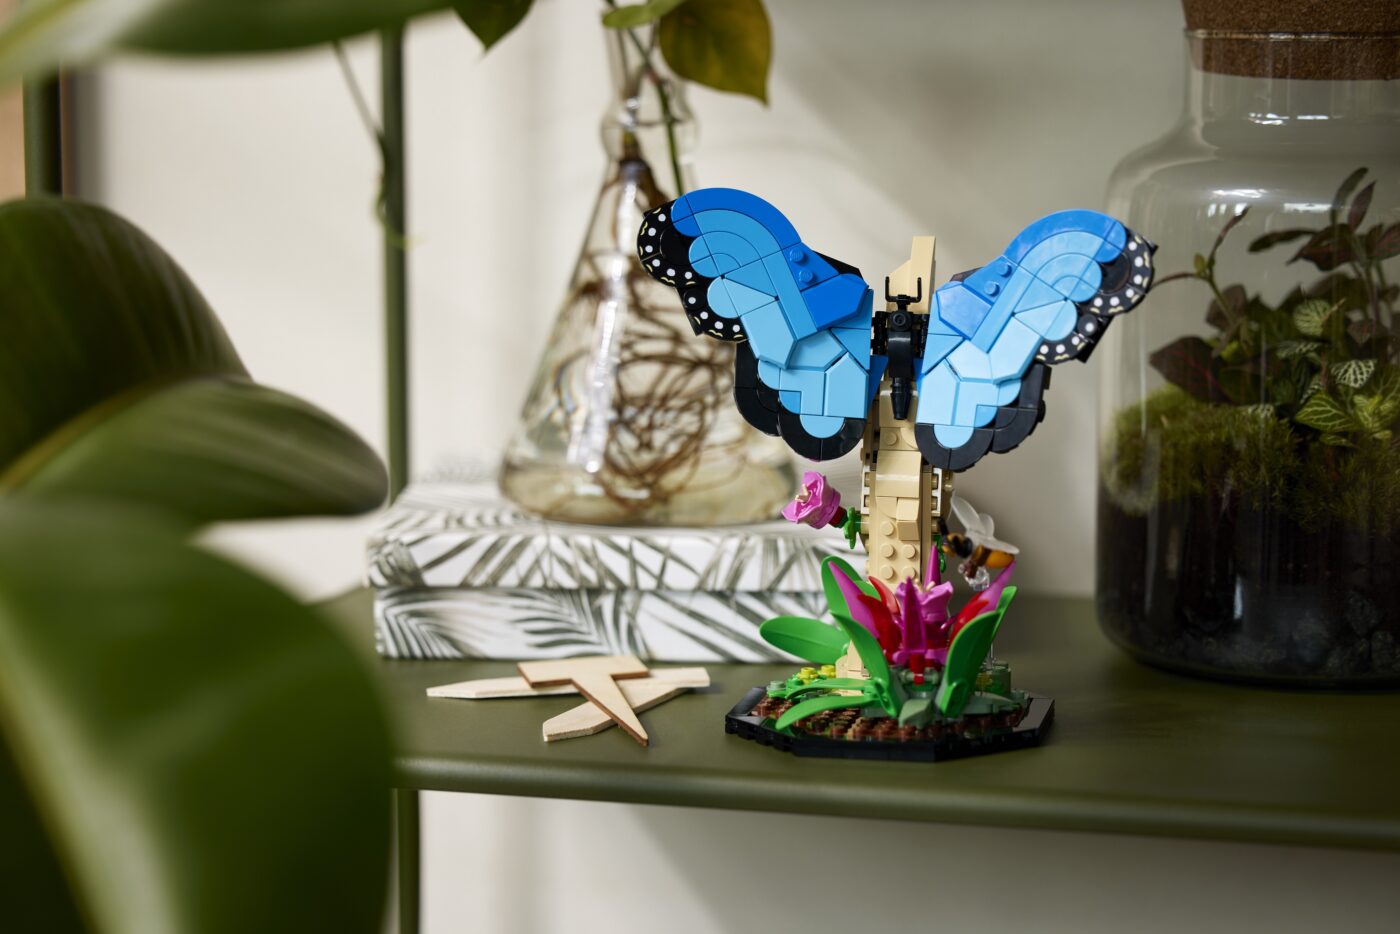 21342 LEGO Insect Collection Lifestyle Blue Morpho Butterfly